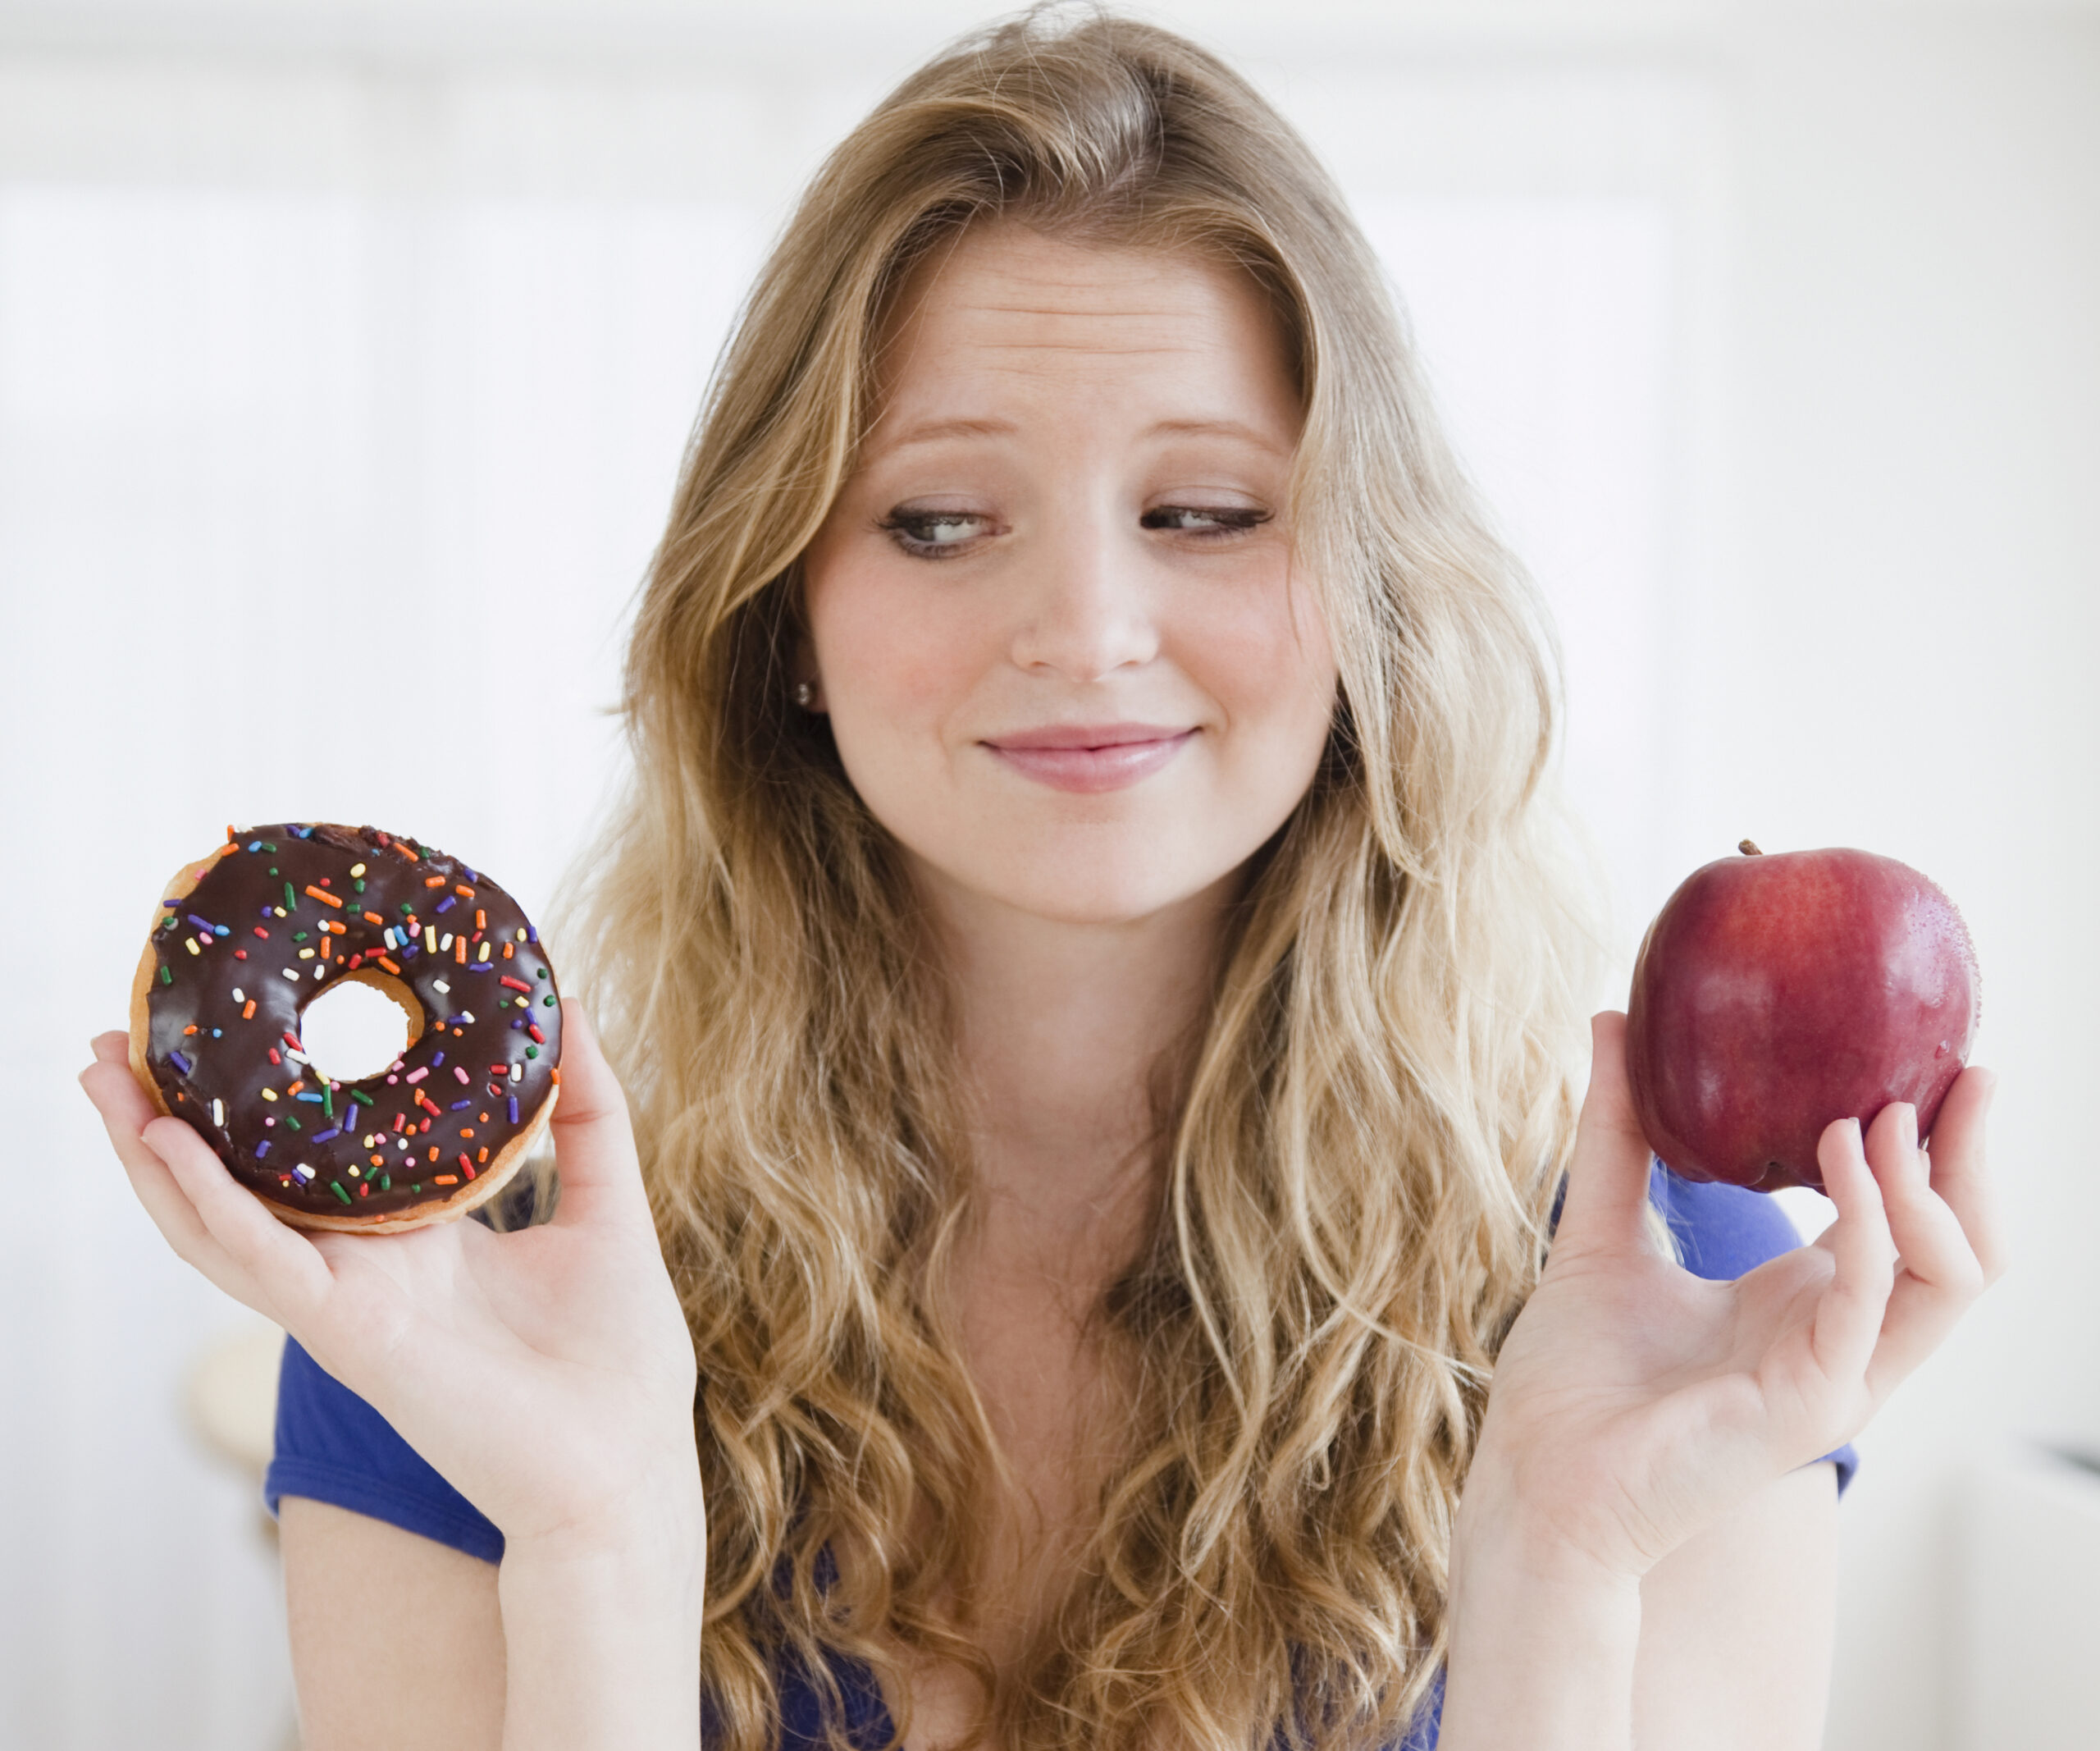 The five foods a dietitian would never touch